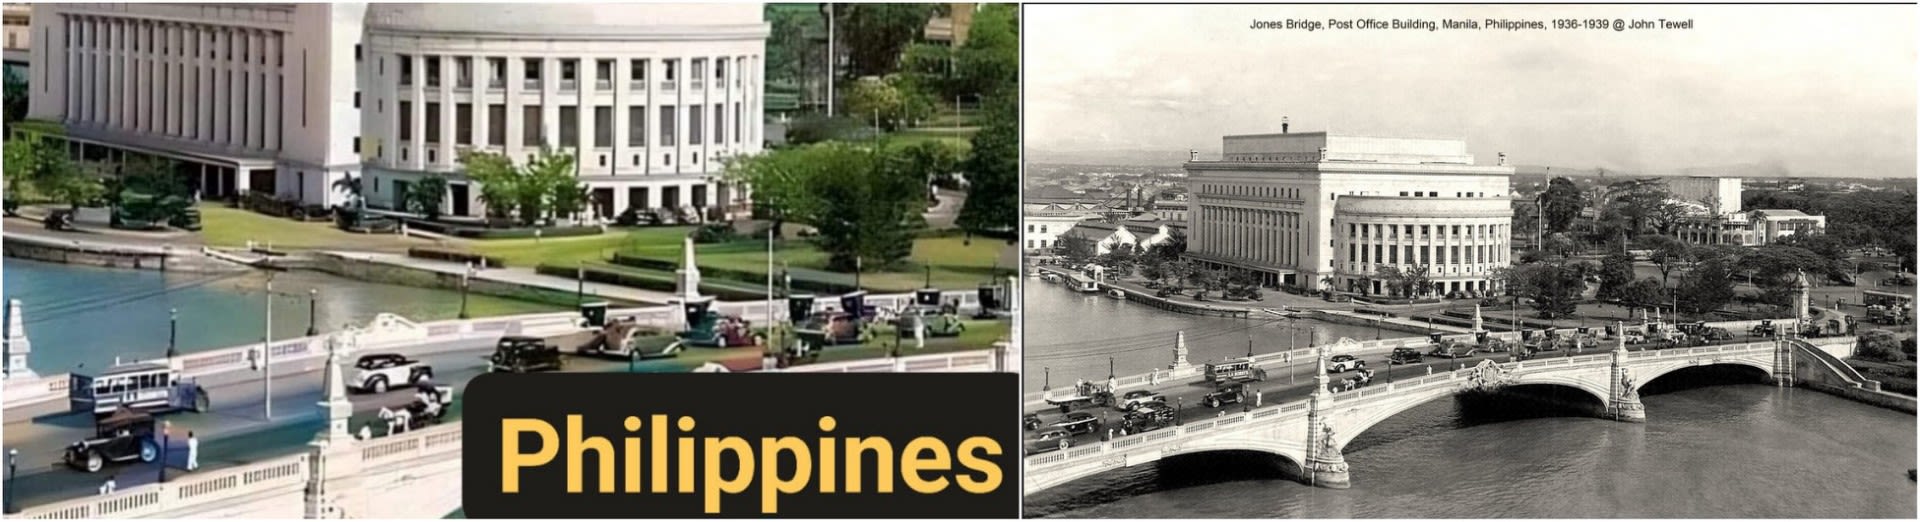 Historical economic data shows Philippines was not 'richest Asian nation' in the 1920s